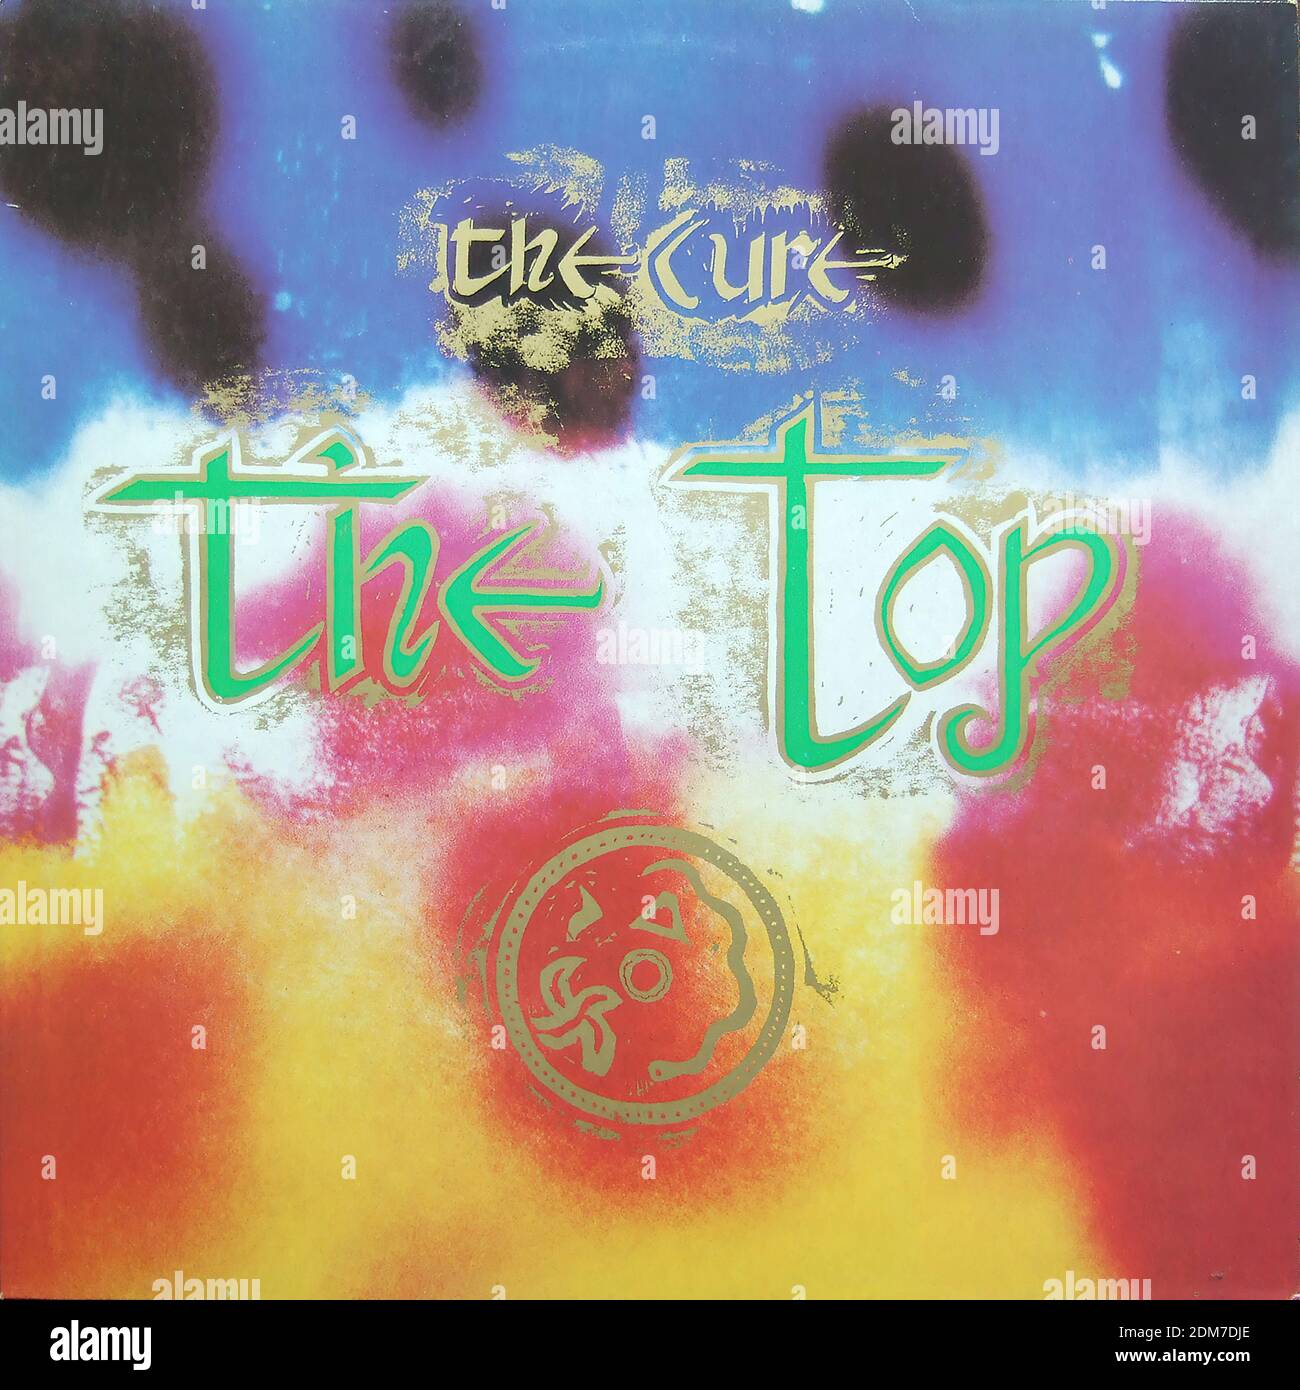 The Cure , The Top